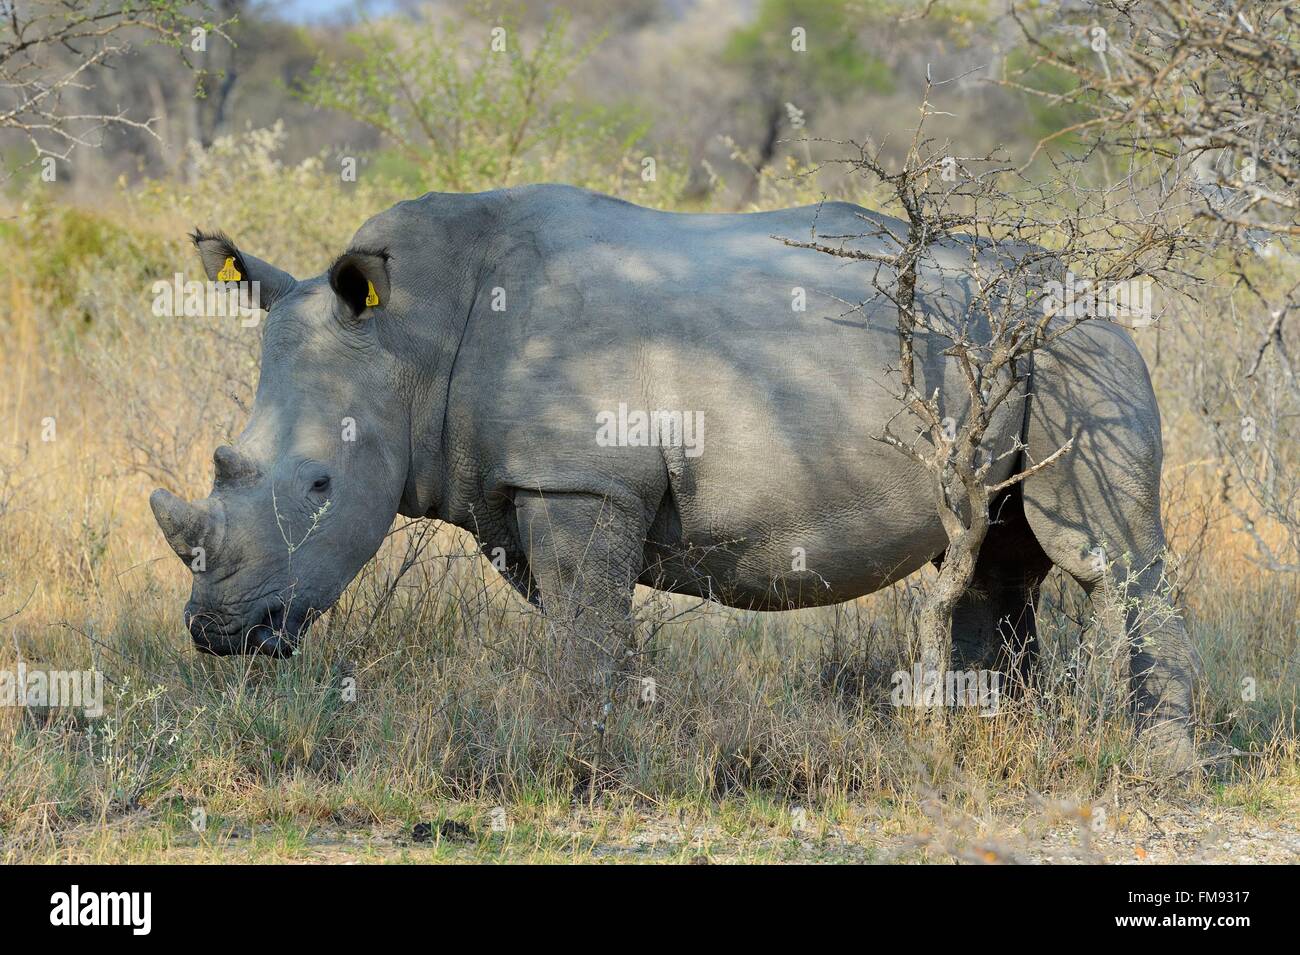 Zimbabwe, Matabeleland South Province, Matobo or Matopos Hills National Park, listed as World Heritage by UNESCO, White Rhinoceros (Ceratotherium simum), young adult of about 7 years Stock Photo